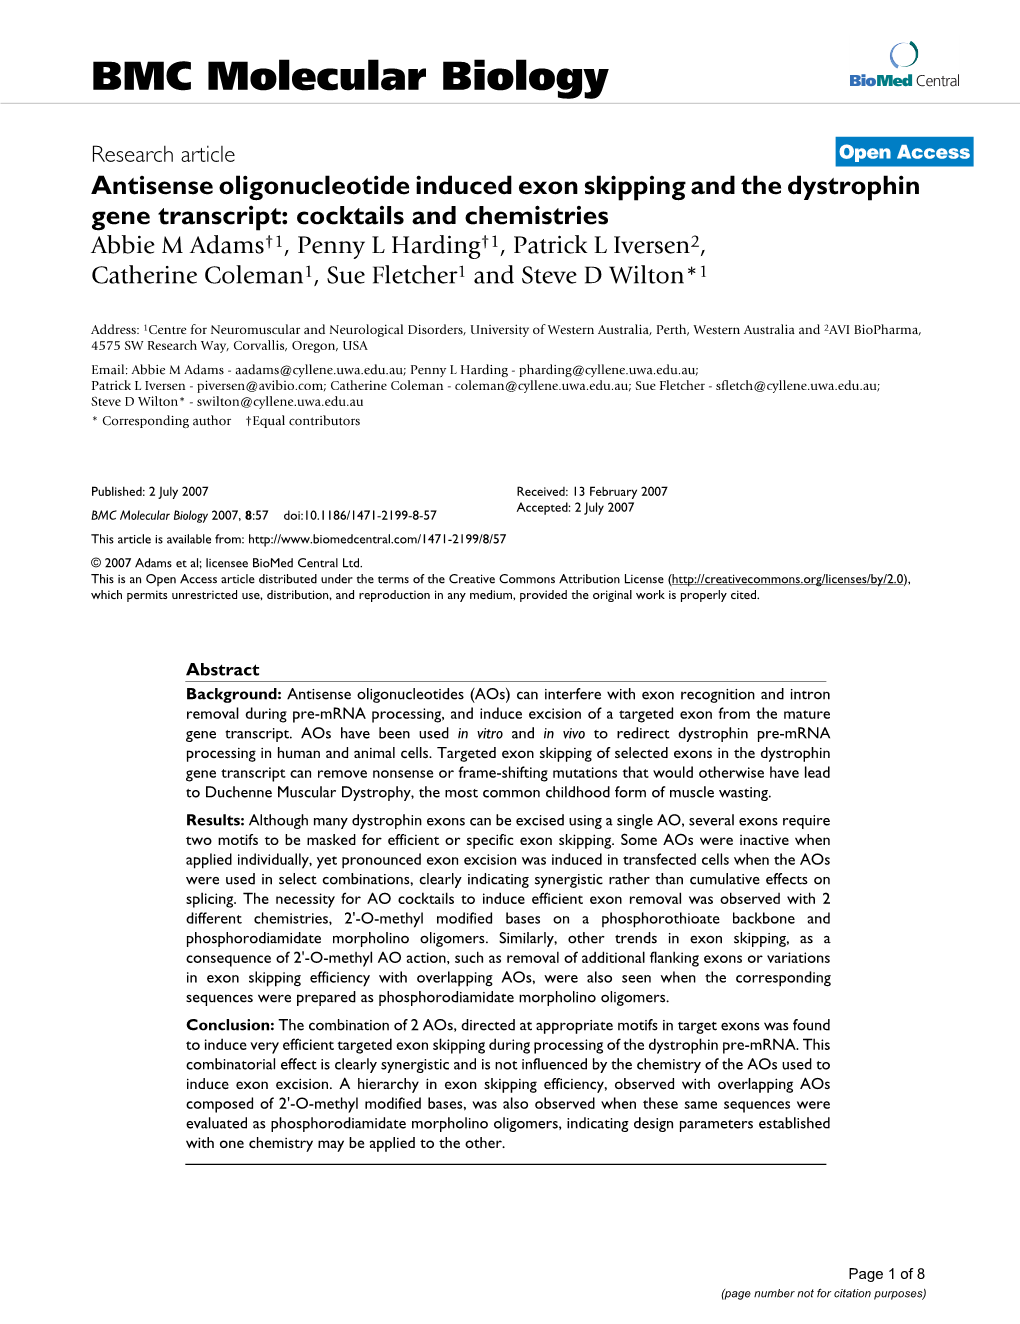 Antisense Oligonucleotide Induced Exon Skipping and the Dystrophin